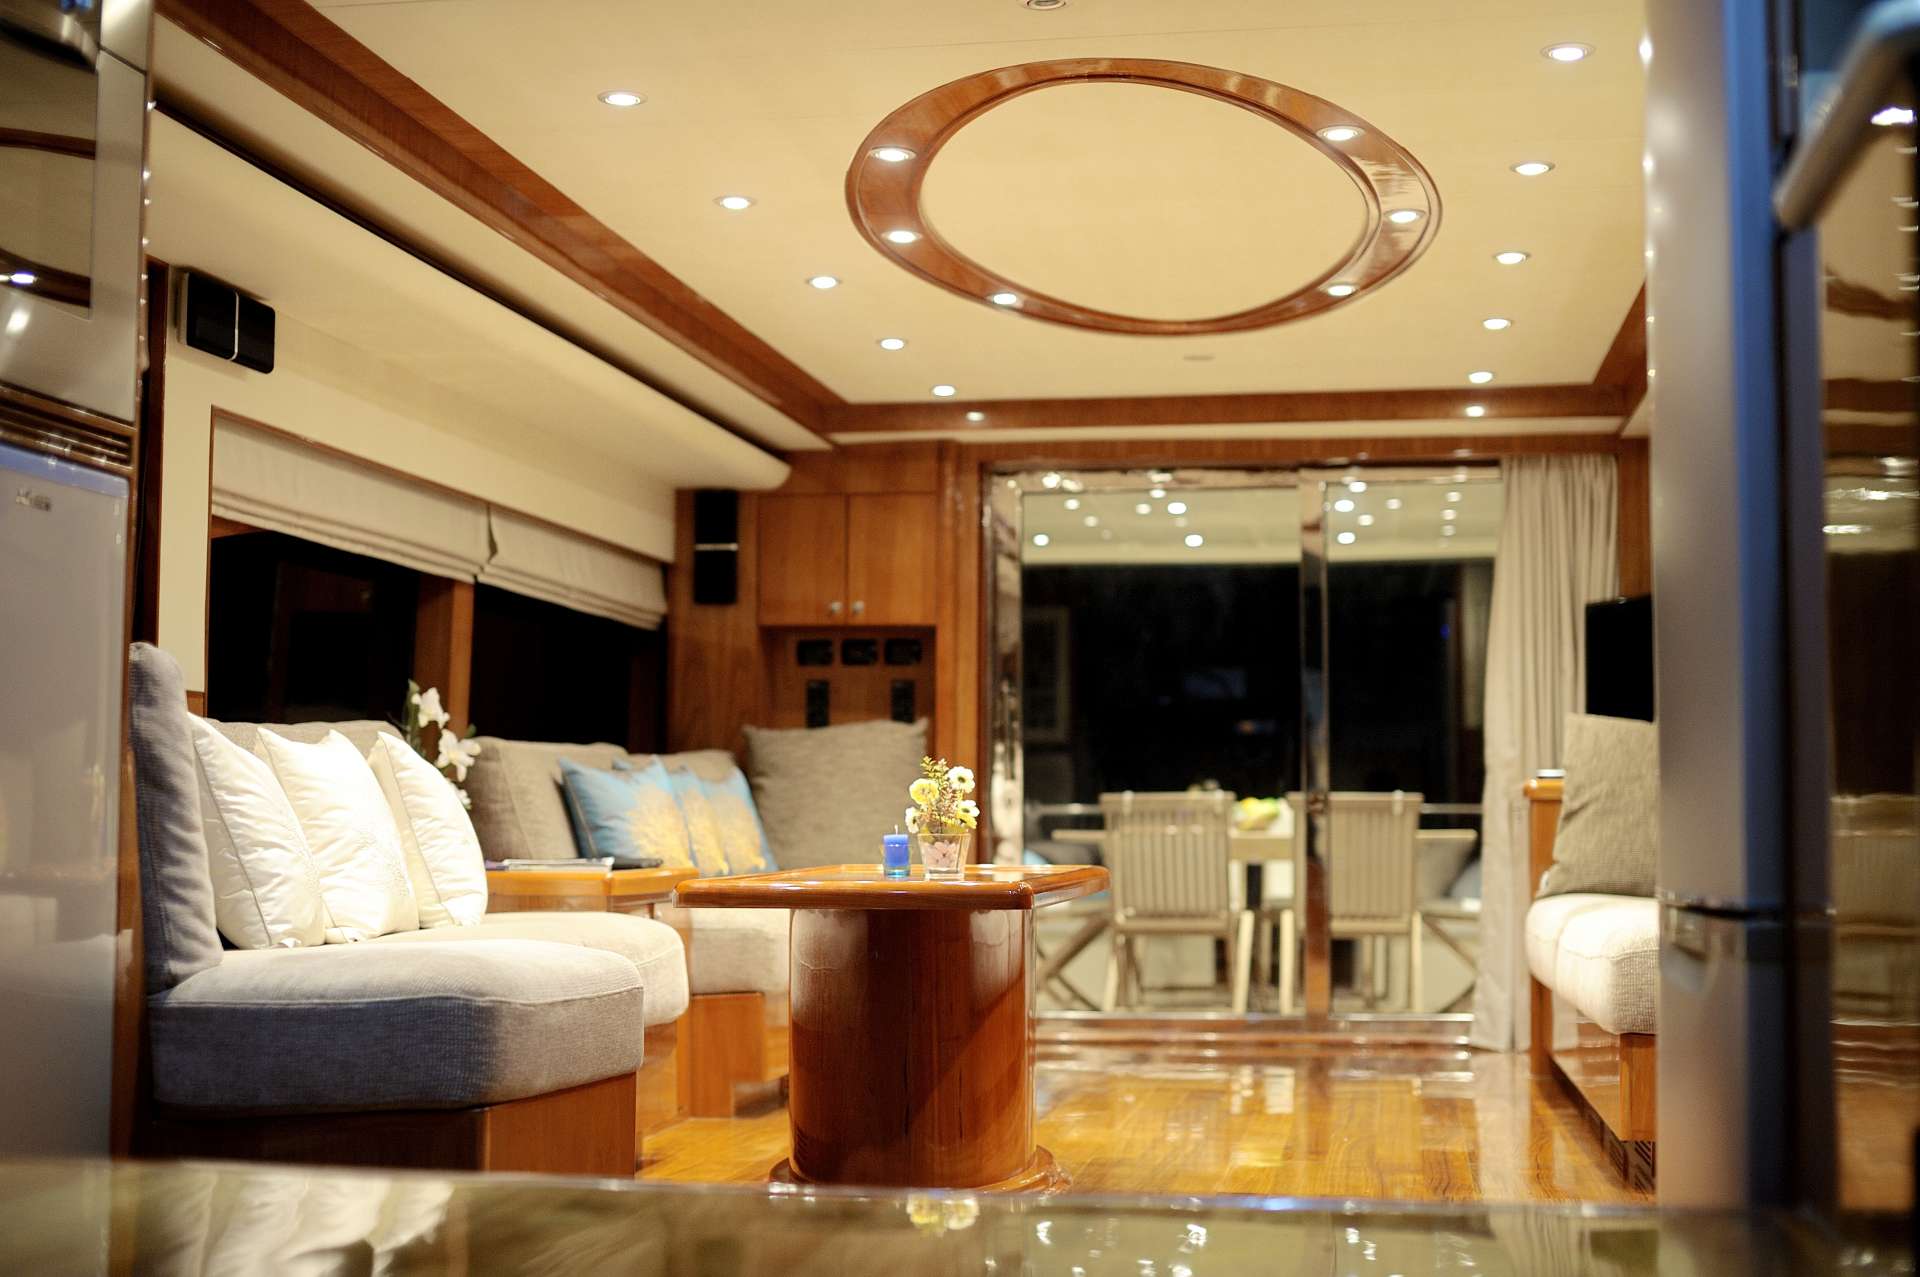 lady kathryn - Yacht Charter Malaysia & Boat hire in SE Asia 2